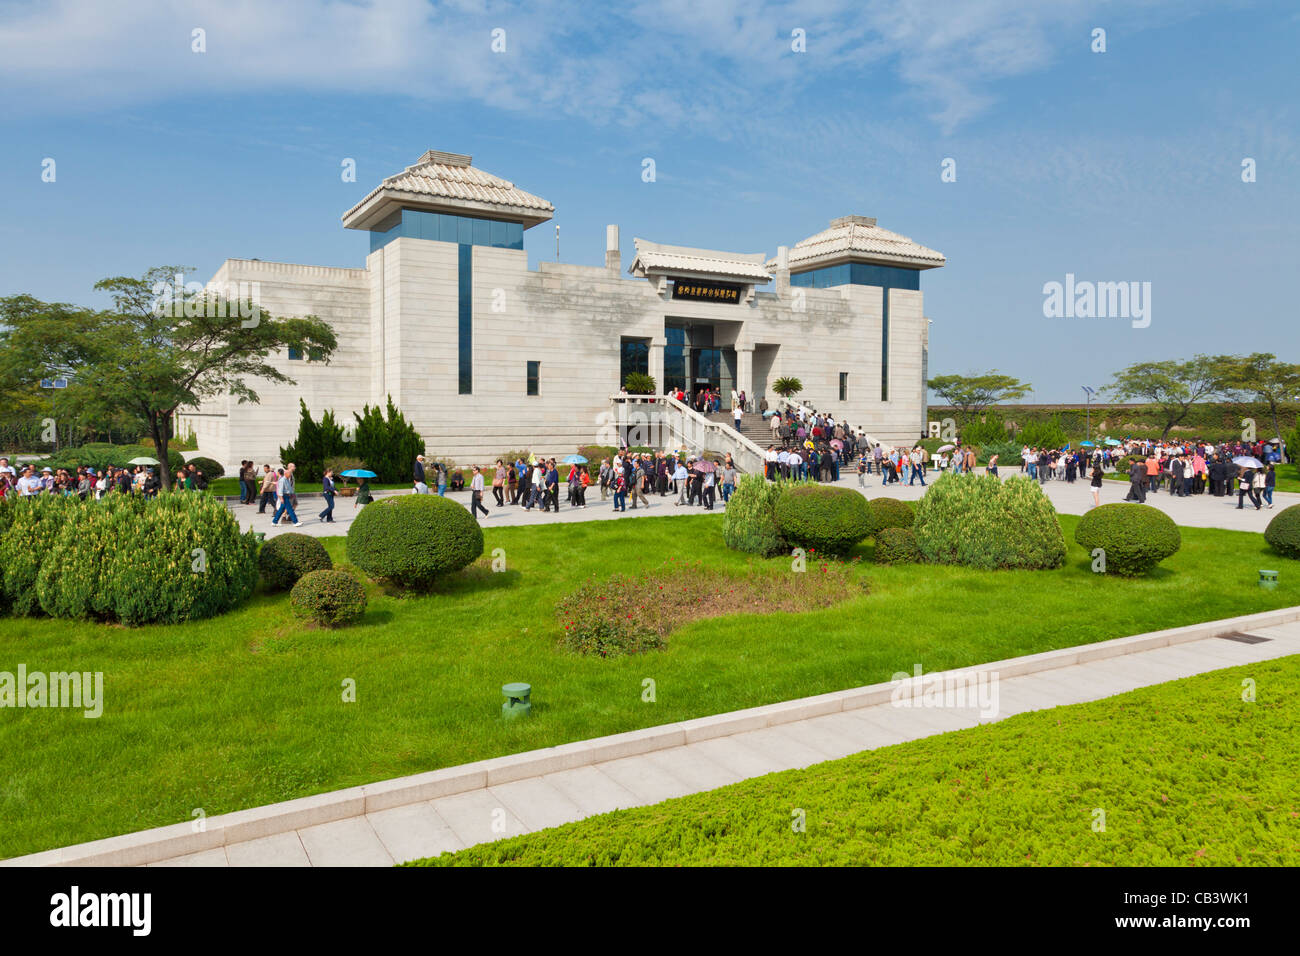 Terracotta Warriors Army museum exterior, Xian, Shaanxi Province, PRC, People's Republic of China, Asia Stock Photo